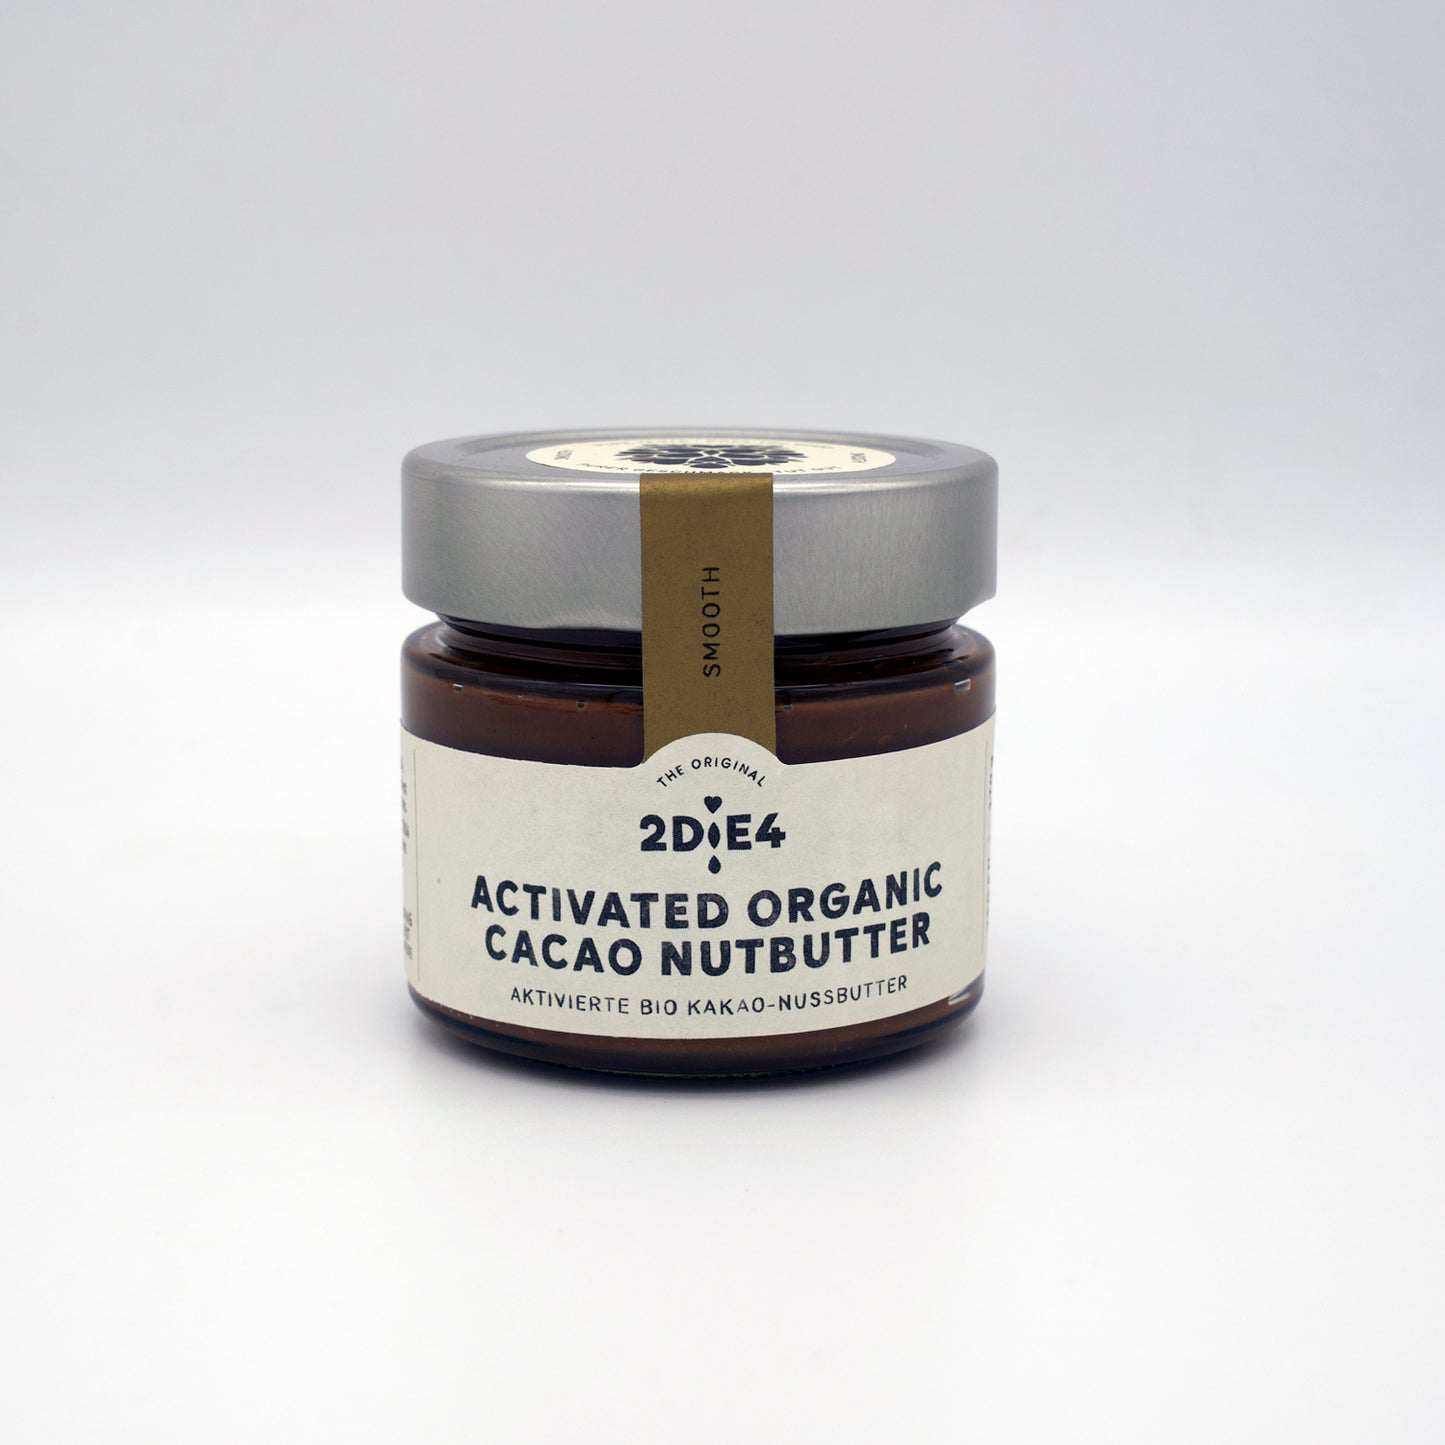 Activated Organic Cacao Nutbutter - Smooth